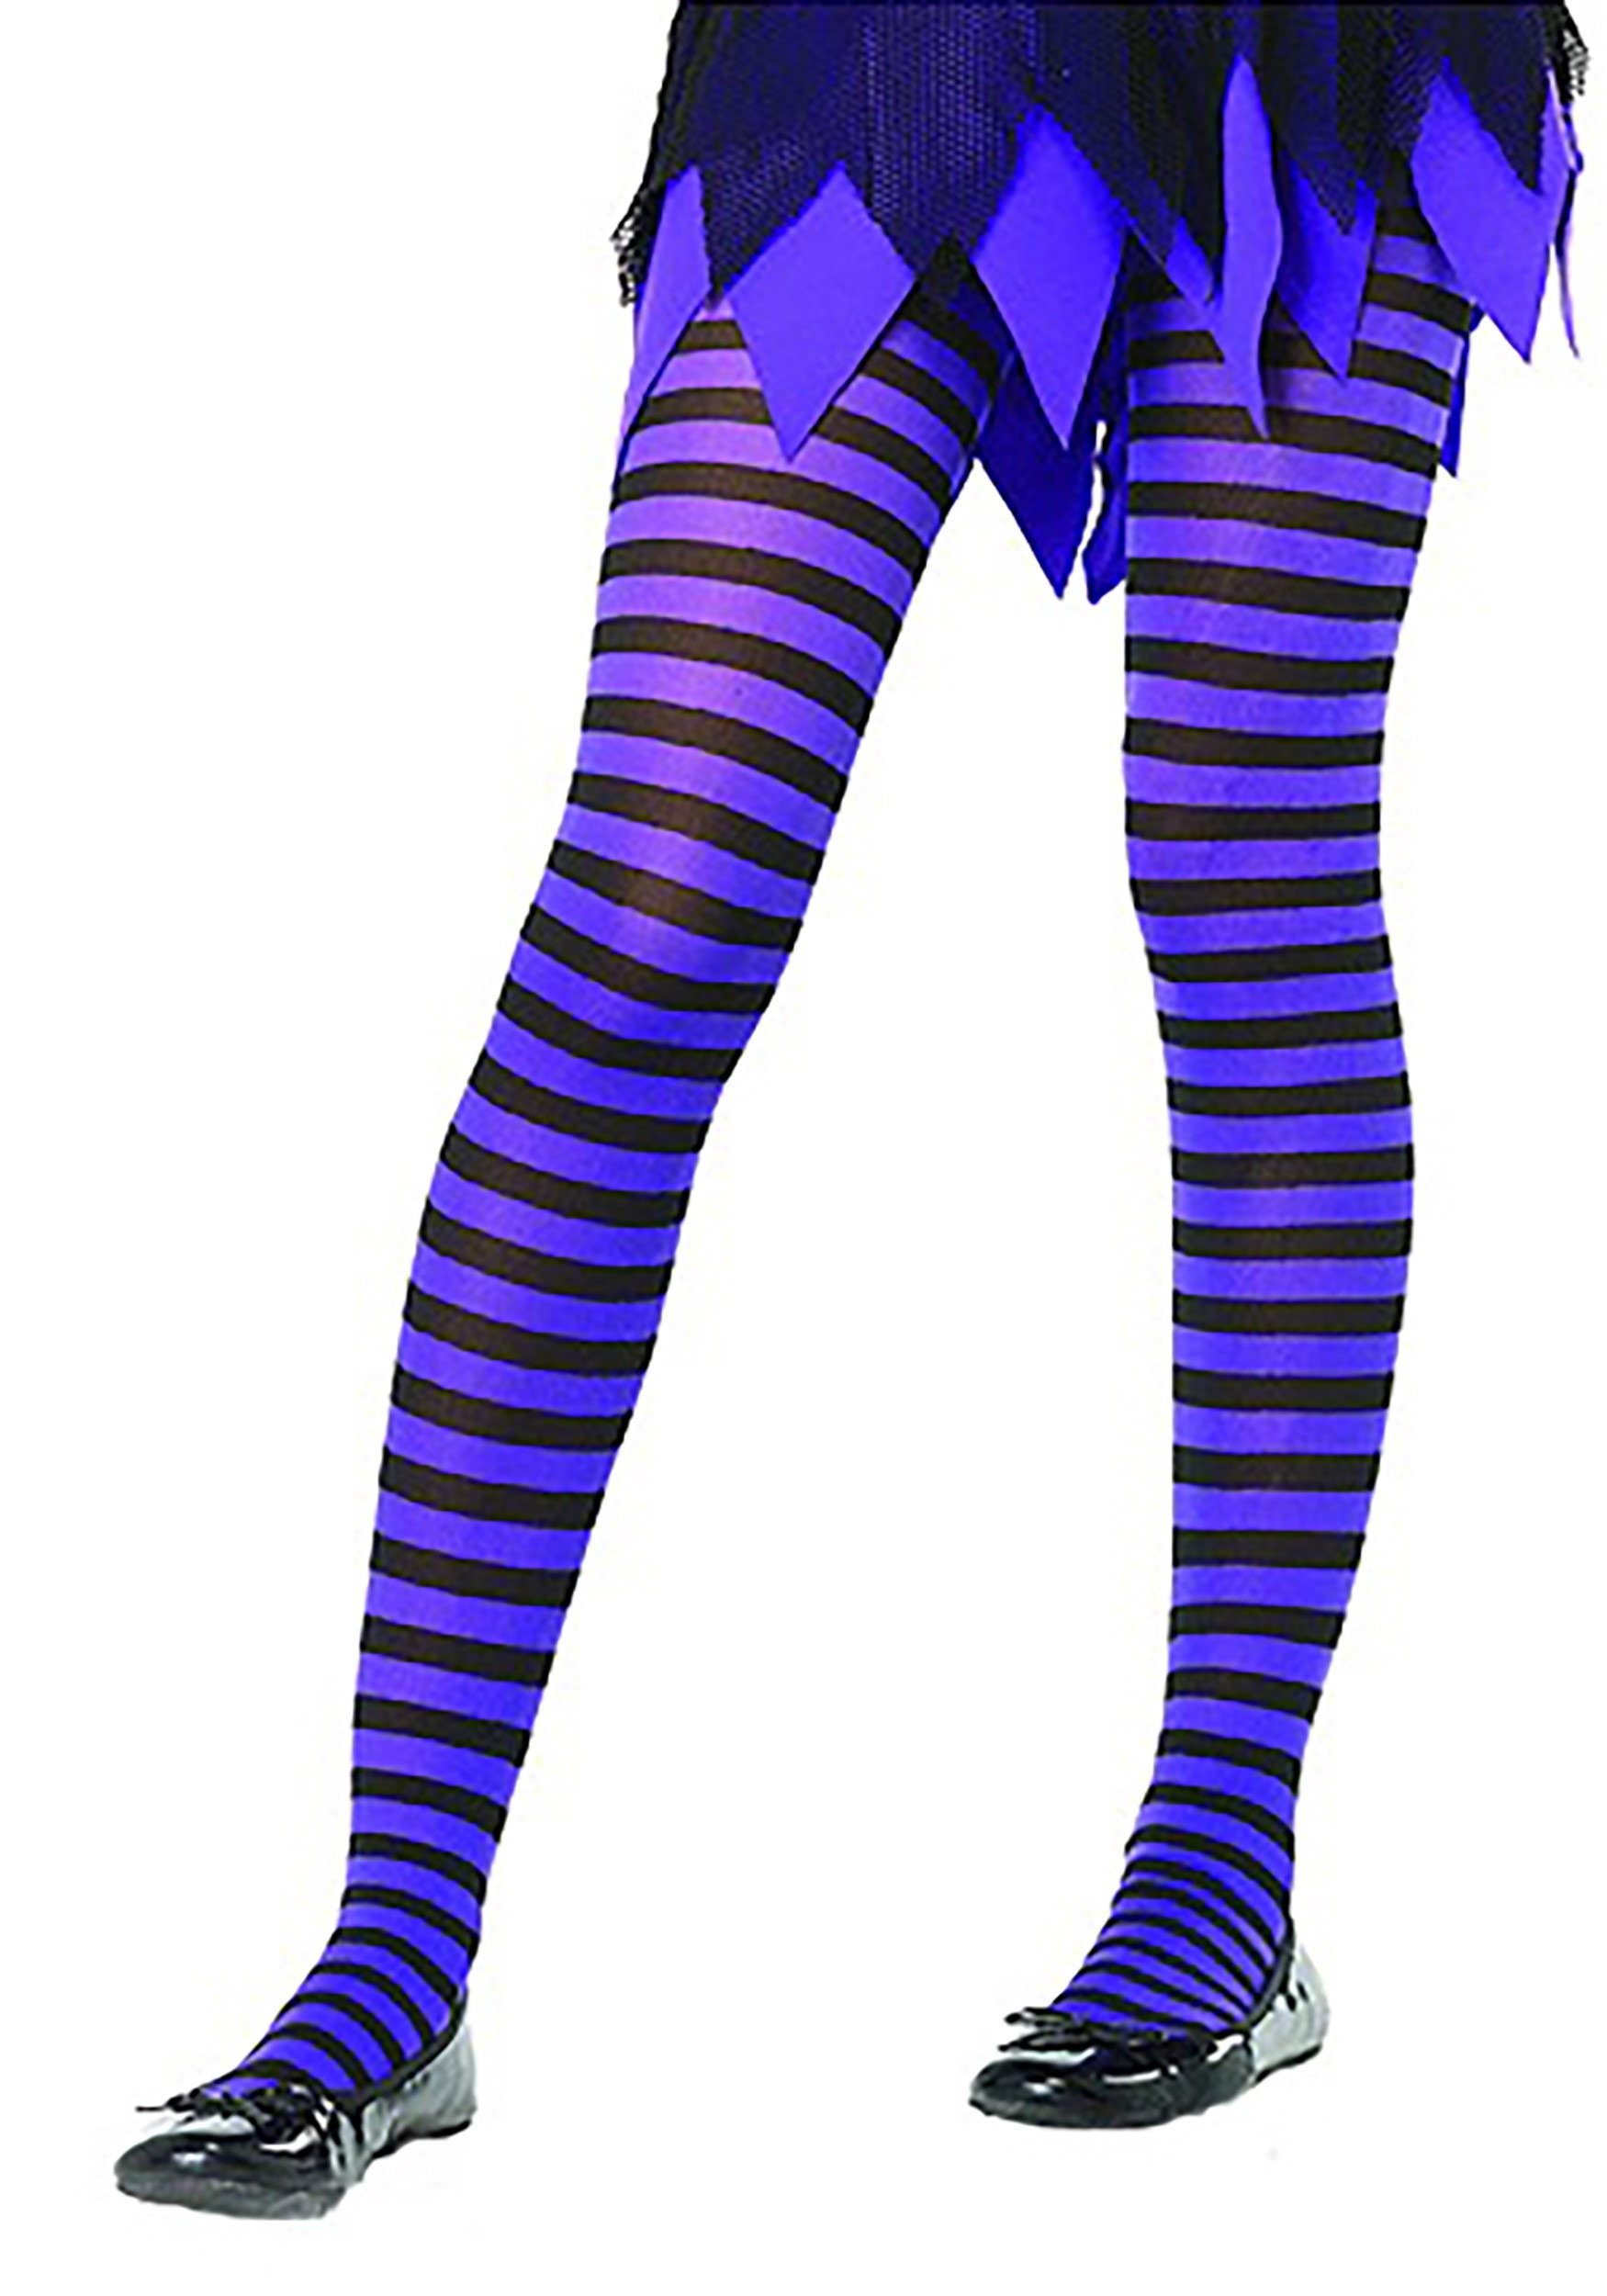 Black And Purple Stripes Tights For Kids , Kid's Striped Tights